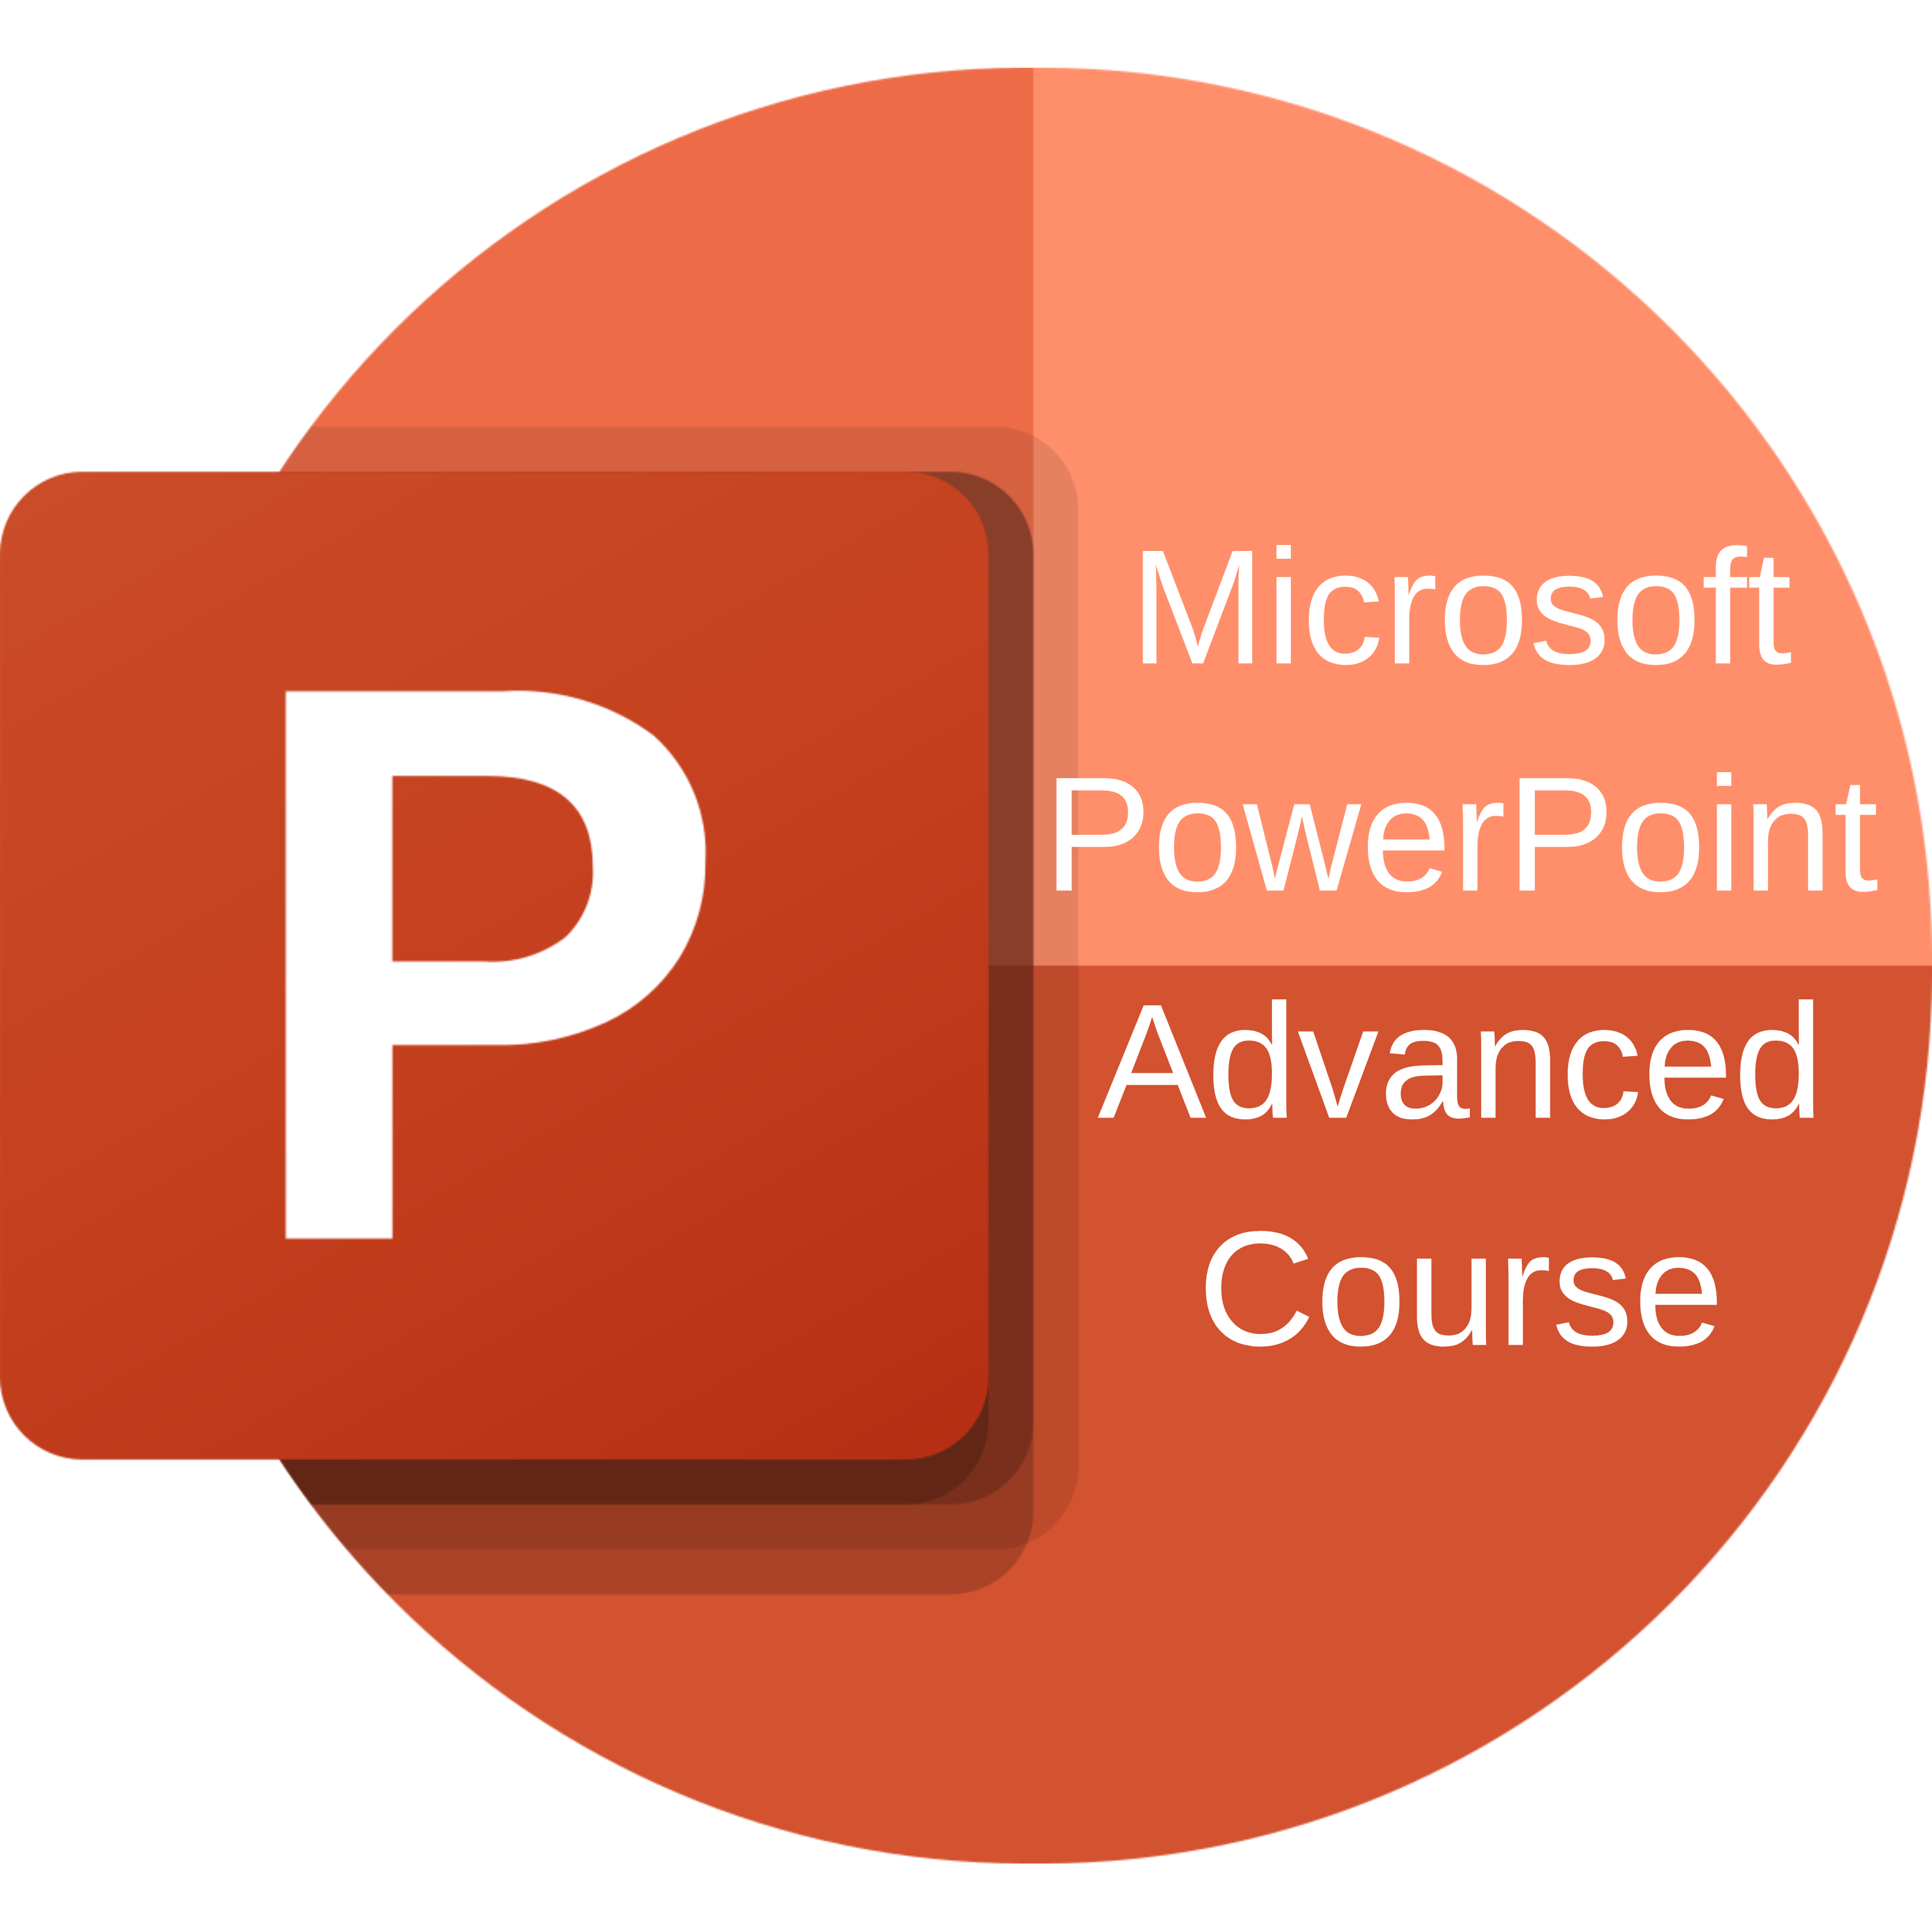 Microsoft PowerPoint Advanced Course